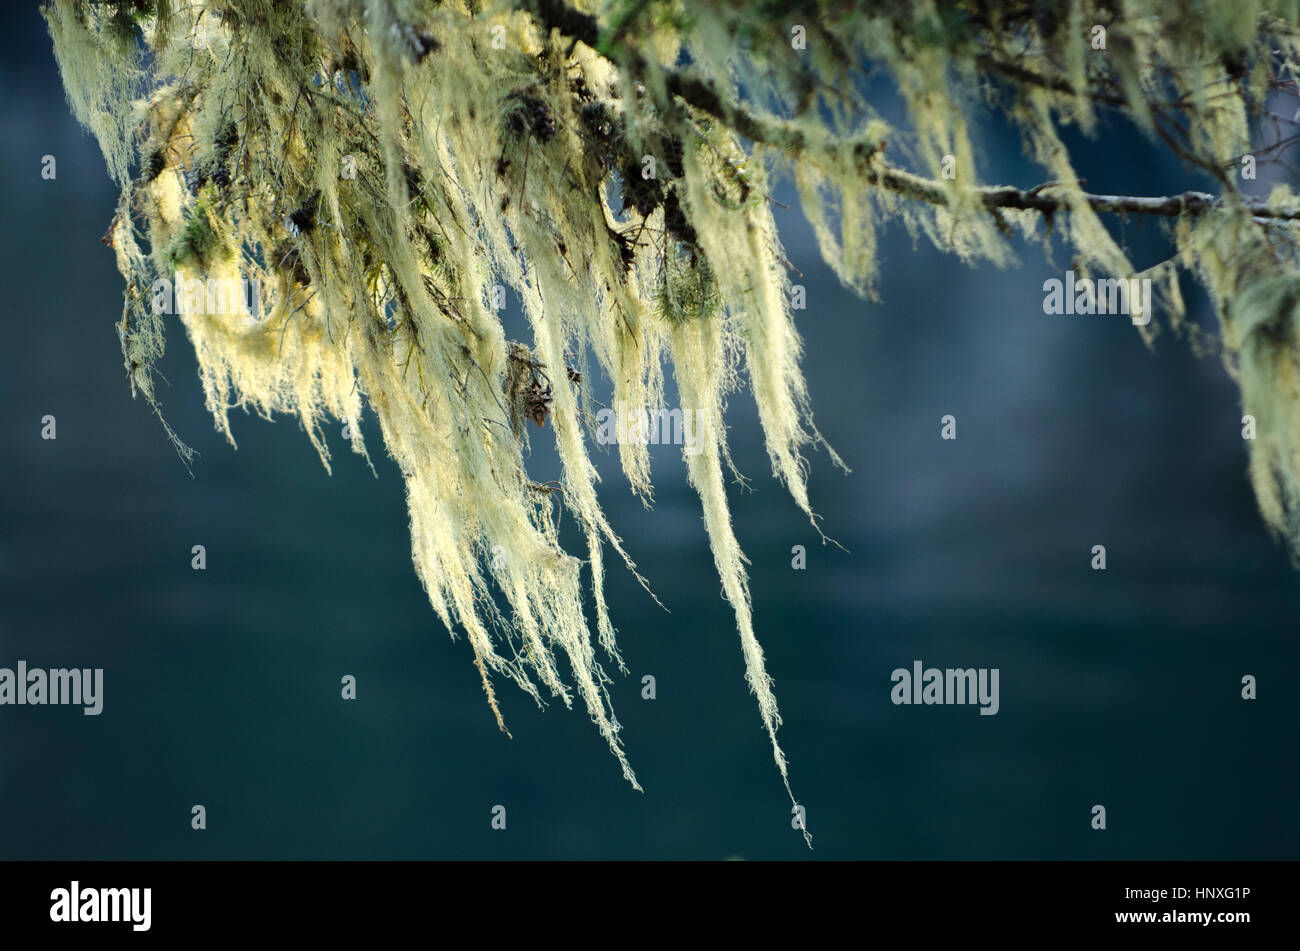 Witch's Hair Lichen in the wind. Stock Photo